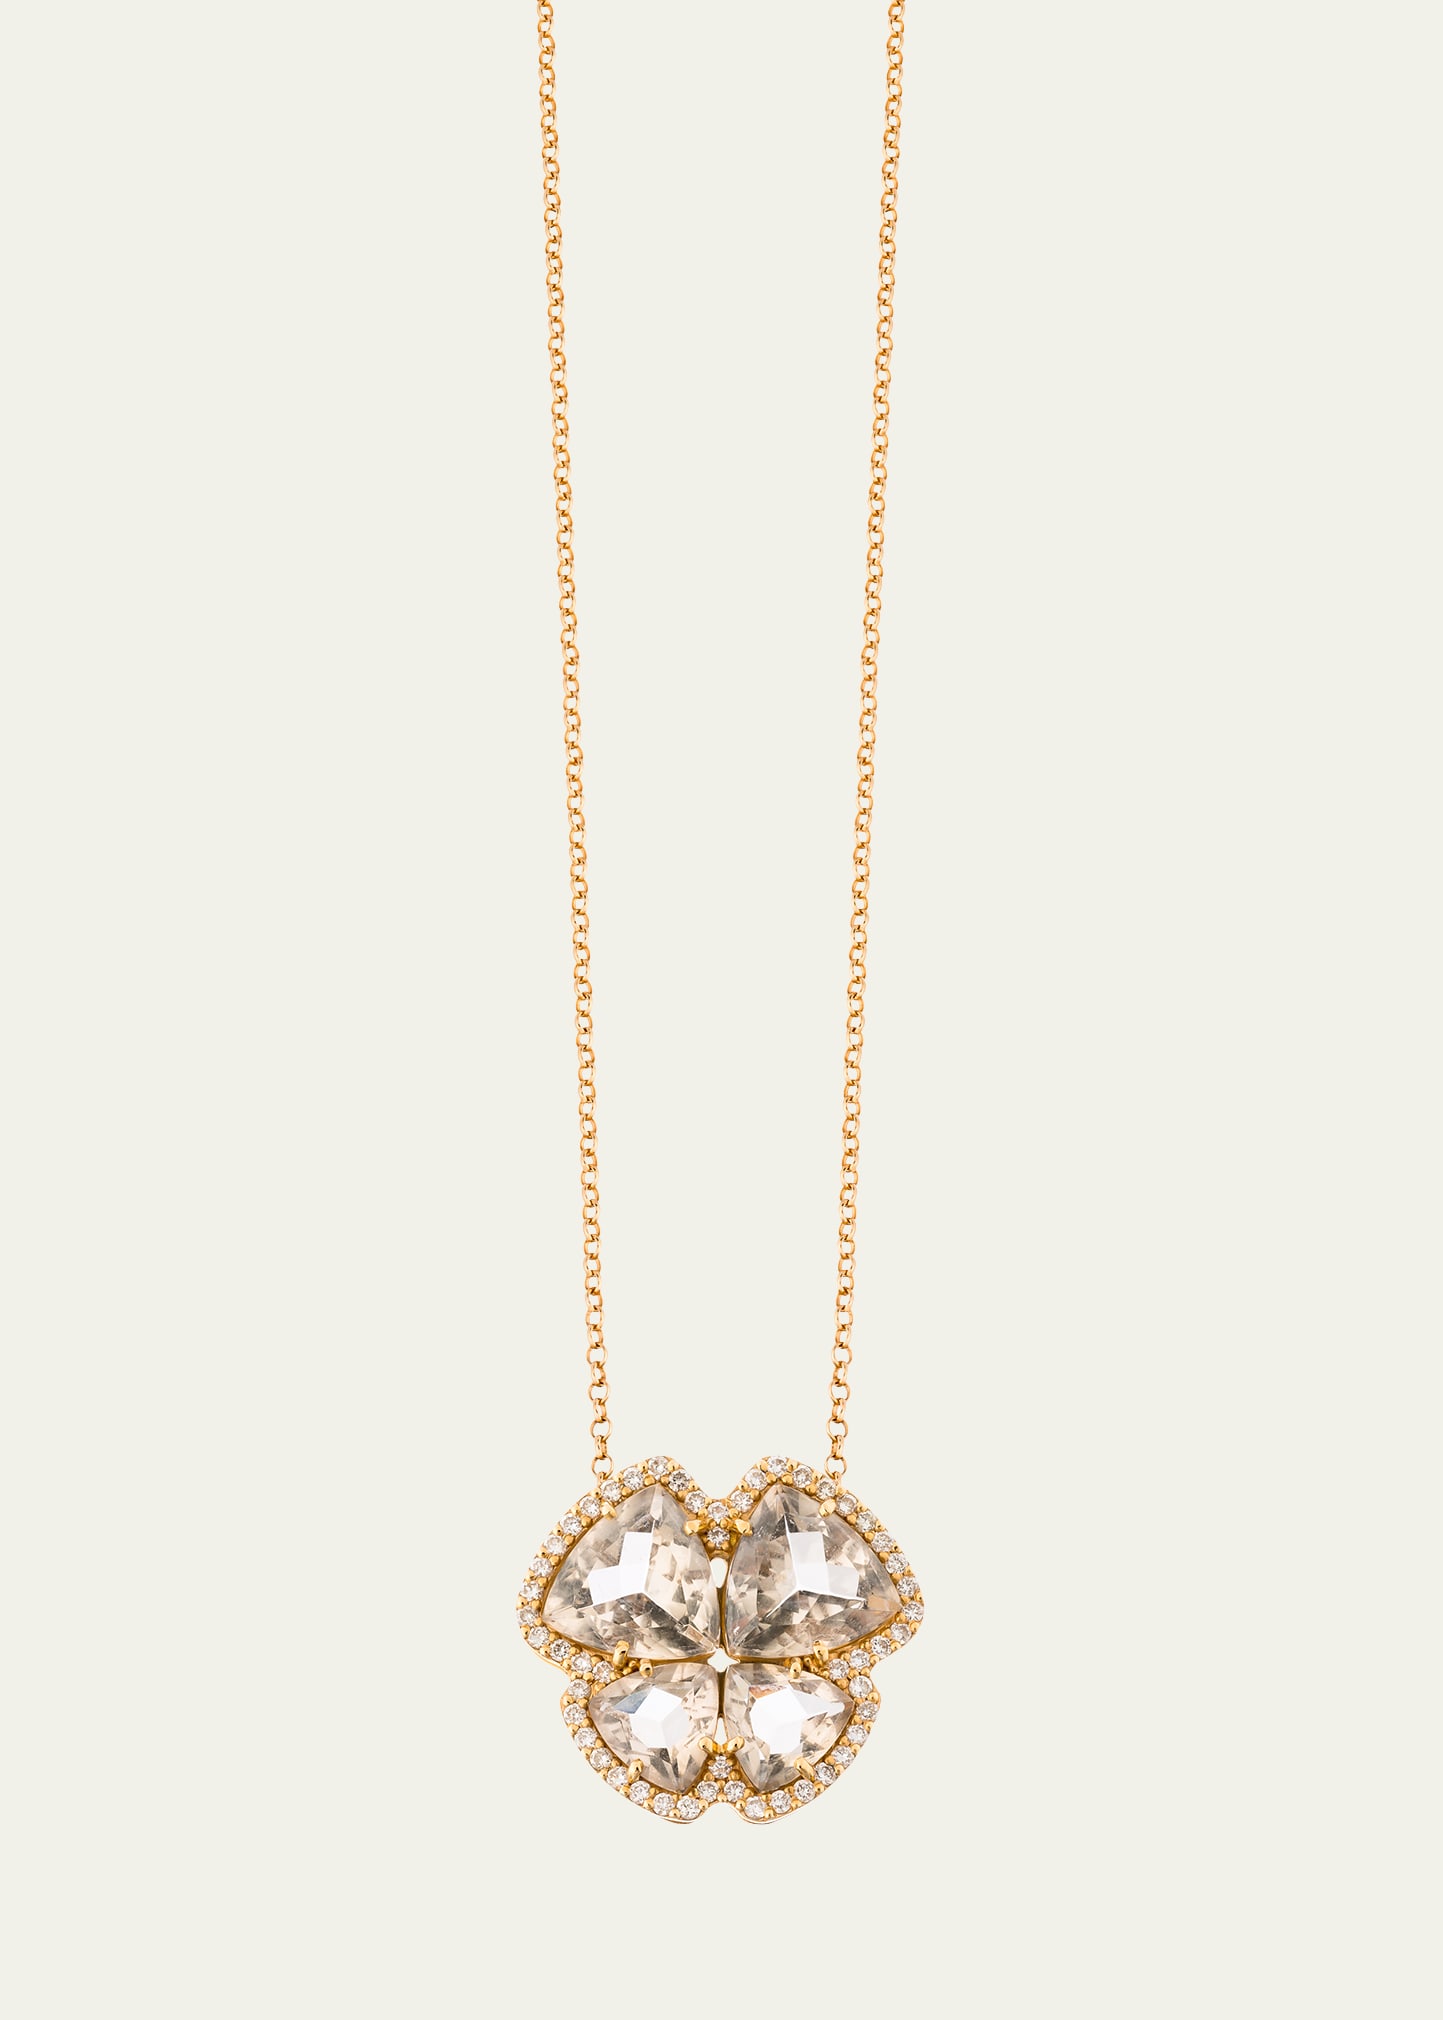 18K Rose Gold Medium Butterfly Necklace with Smoky Quartz and Diamonds